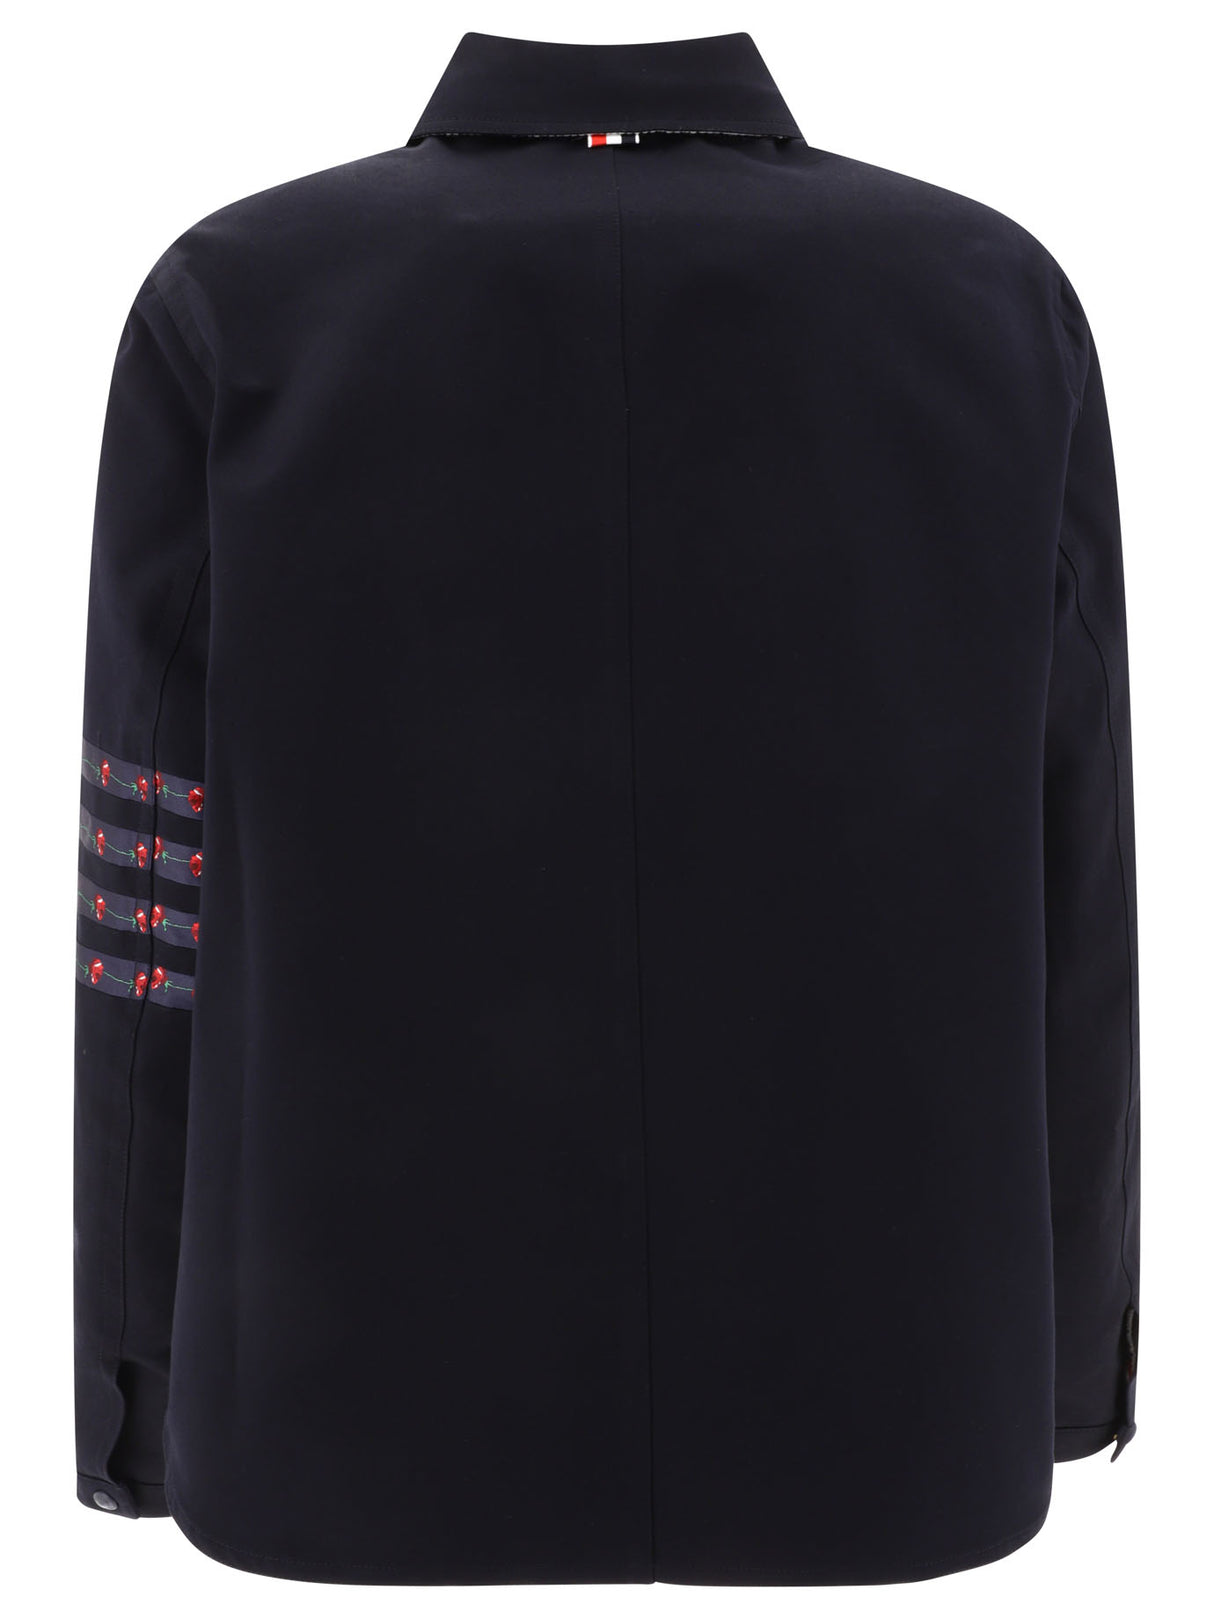 THOM BROWNE Navy Overshirt Jacket for Men - FW24 Collection